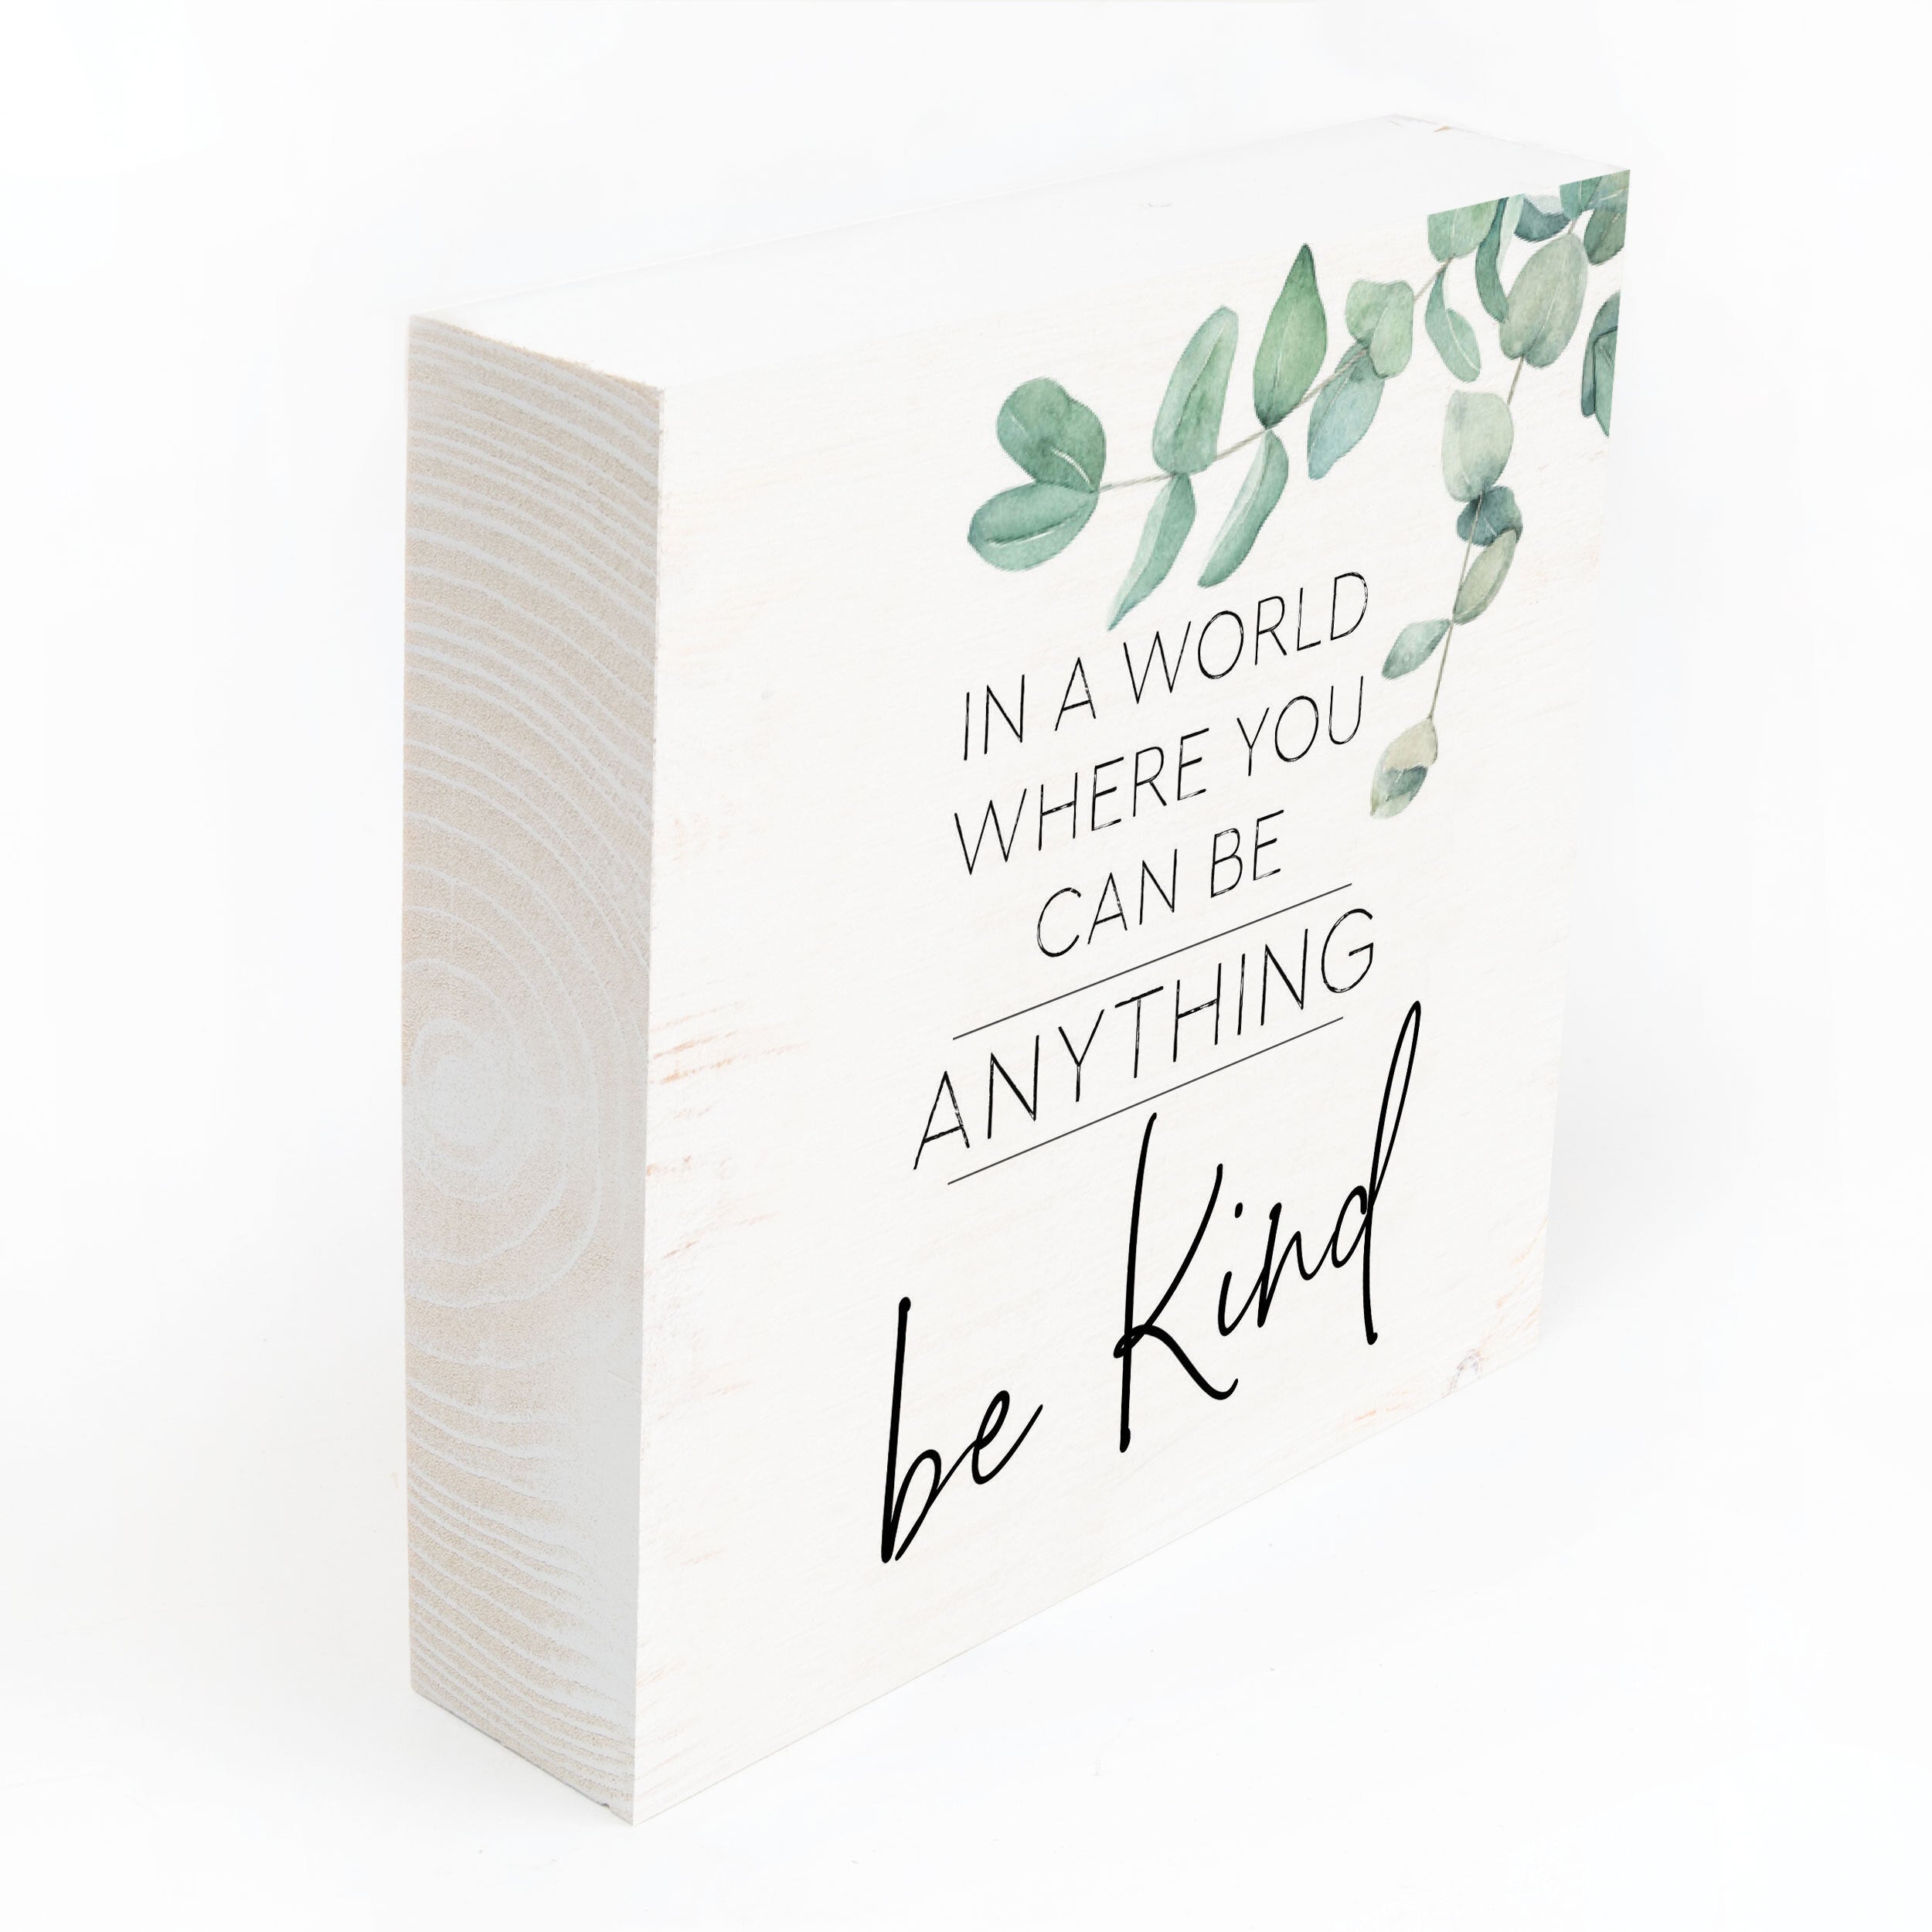 In A World Where You Can Be Anything Be Kind Wood Block Décor